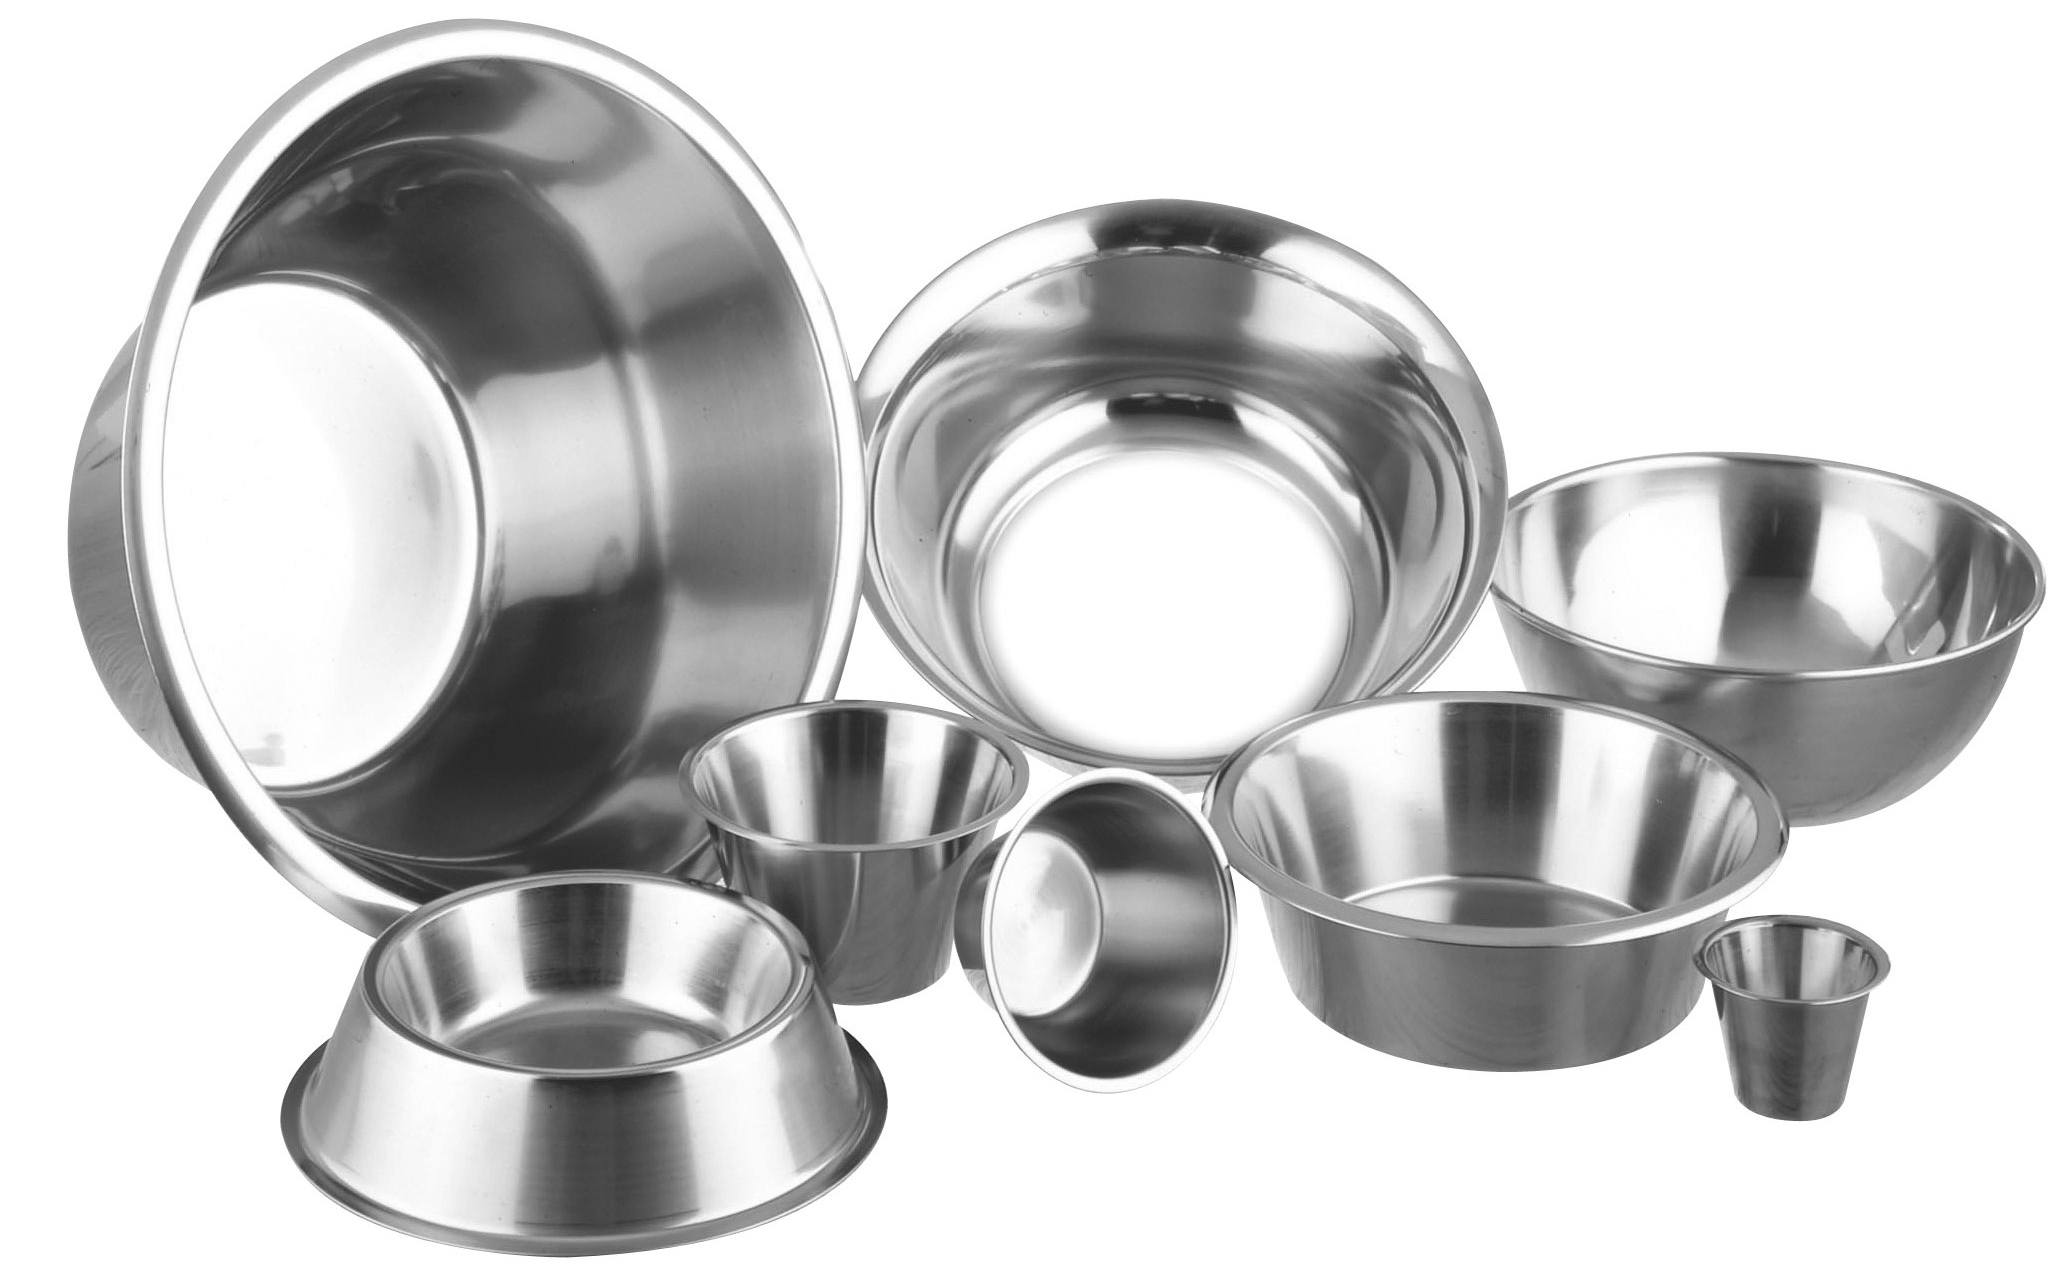 stainless steel bowls and basins